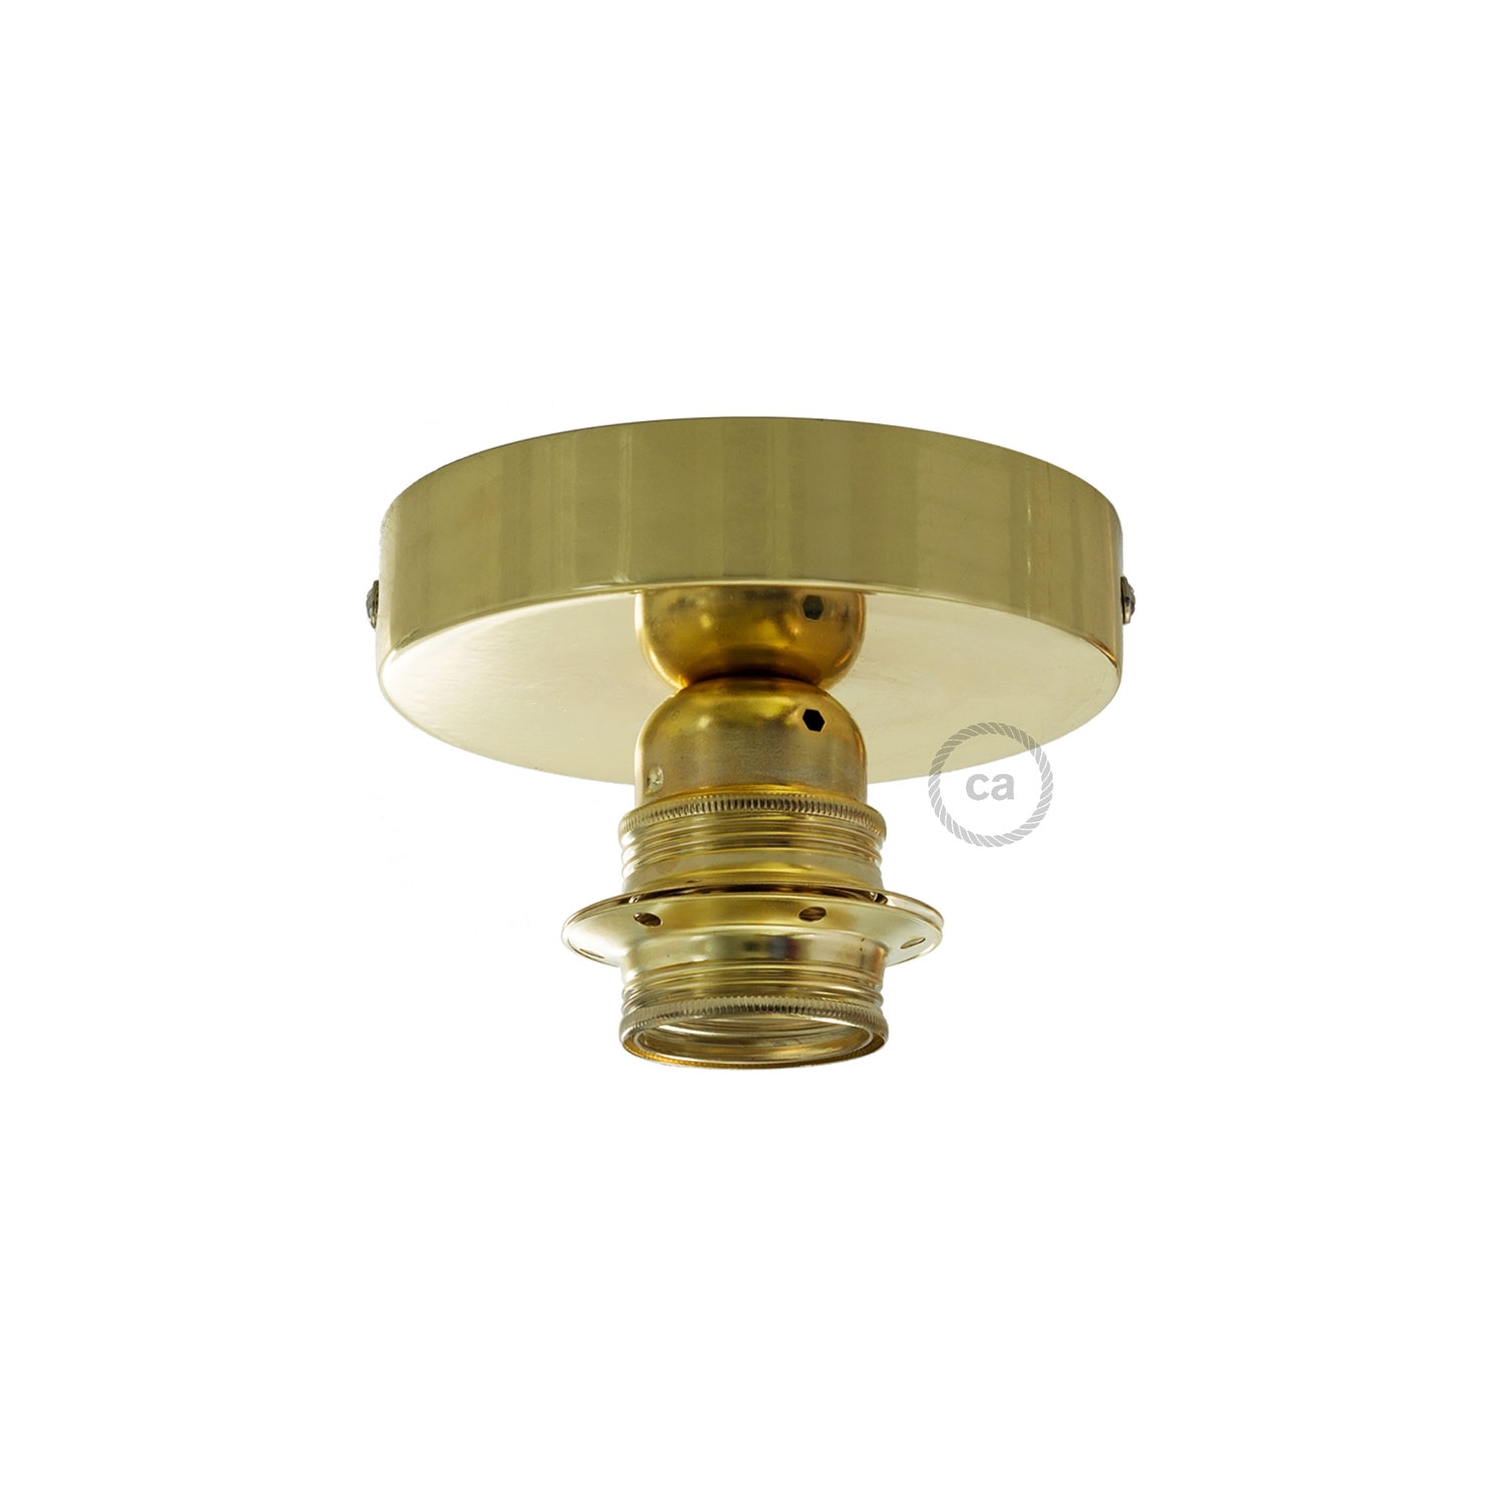 Fermaluce Brass metal finish, with E26 threaded lamp holder, the metal wall or ceiling light source